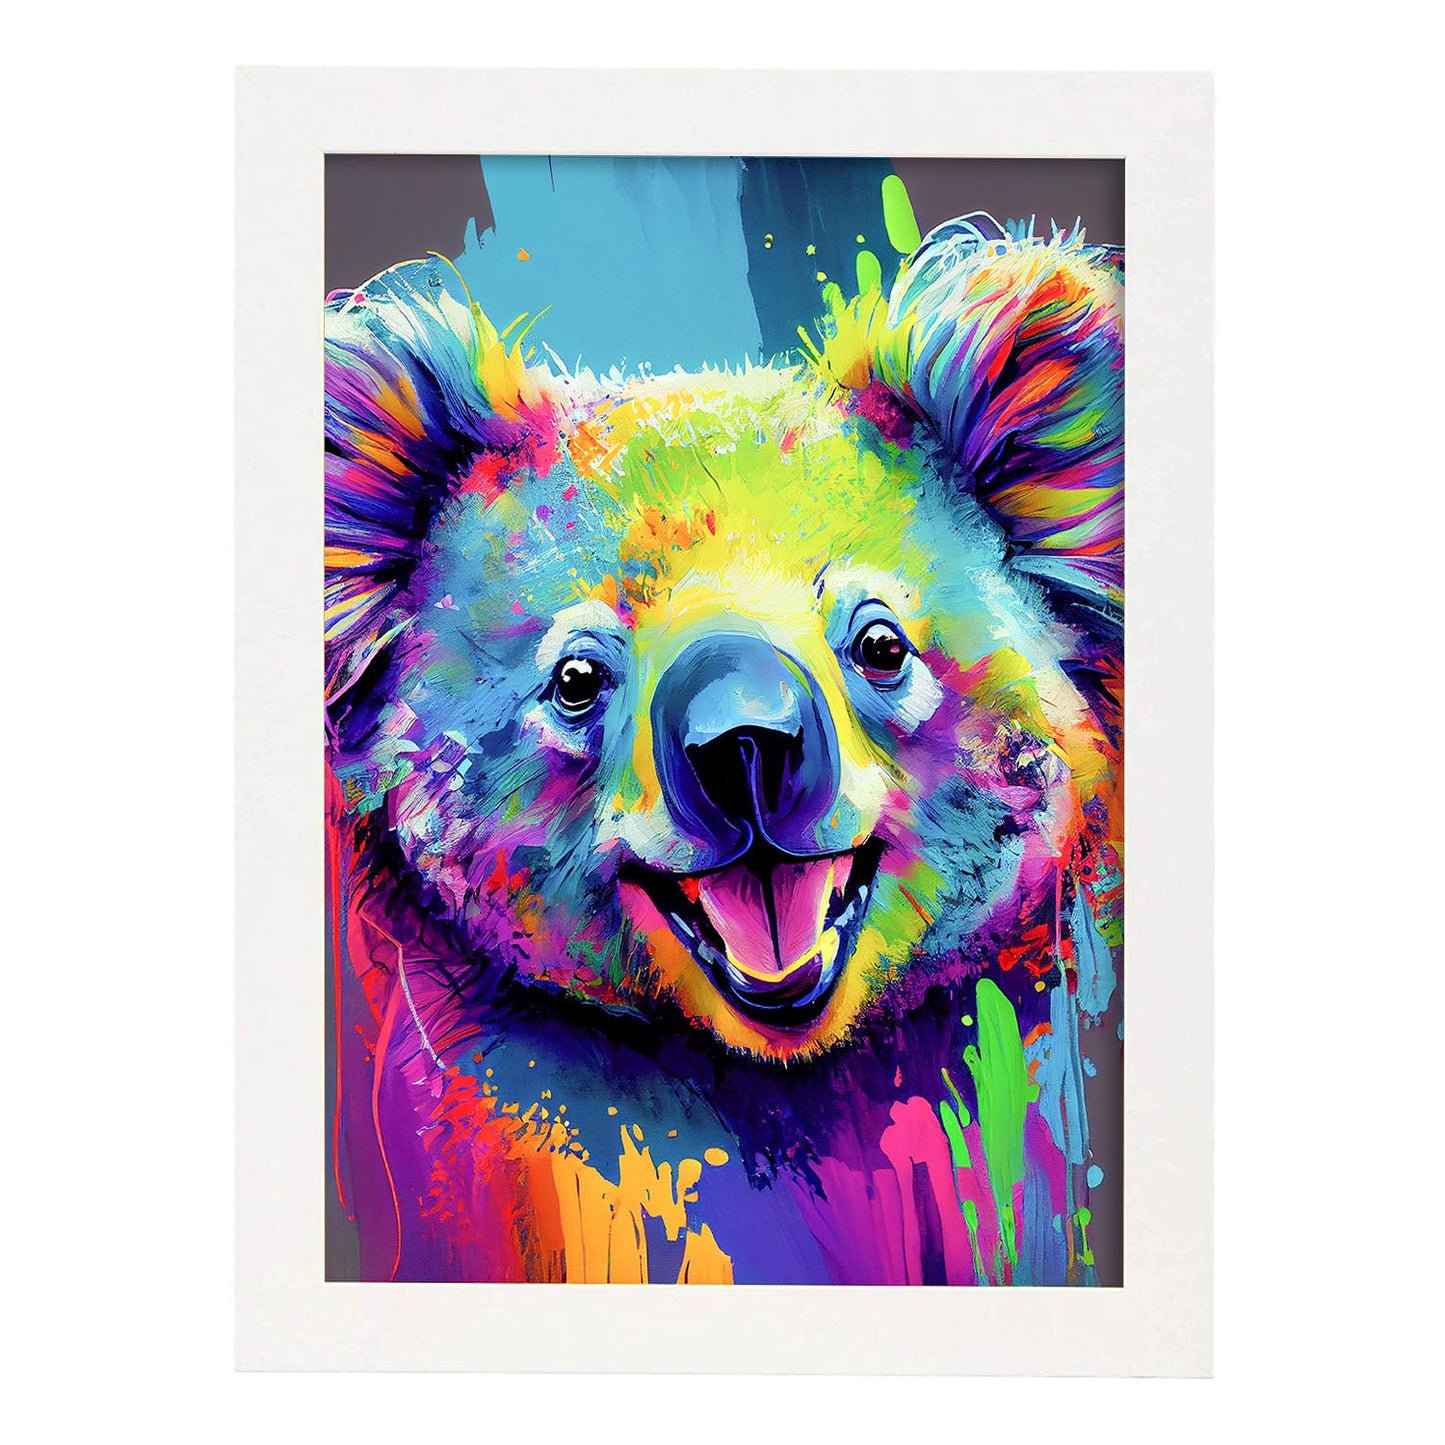 Nacnic Abstract smiling Koala in Lisa Fran Style_3. Aesthetic Wall Art Prints for Bedroom or Living Room Design.